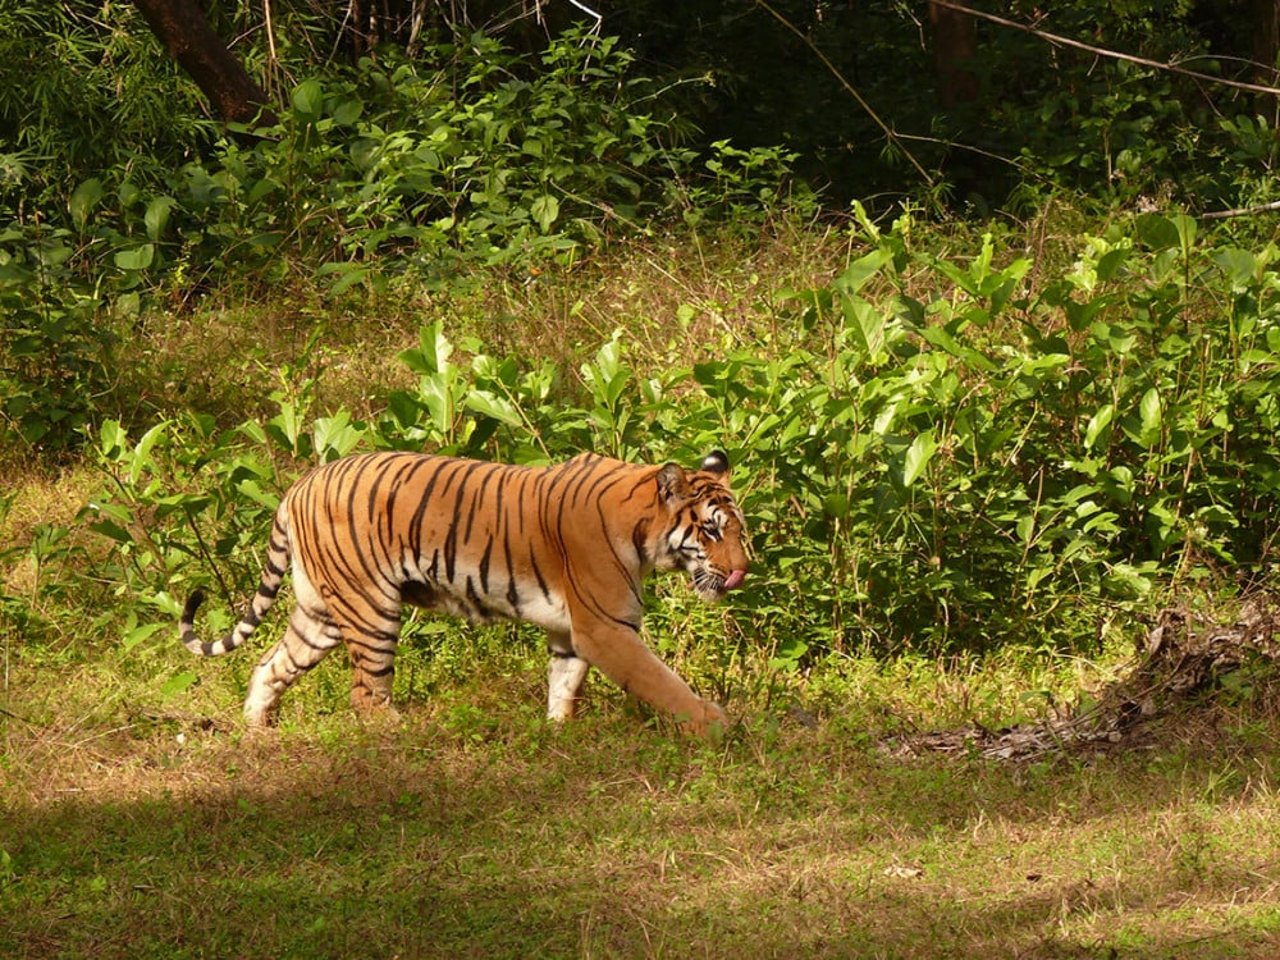 Tiger picture in Navegaon Nagzira Tiger Reserve by Heerak Nandy  